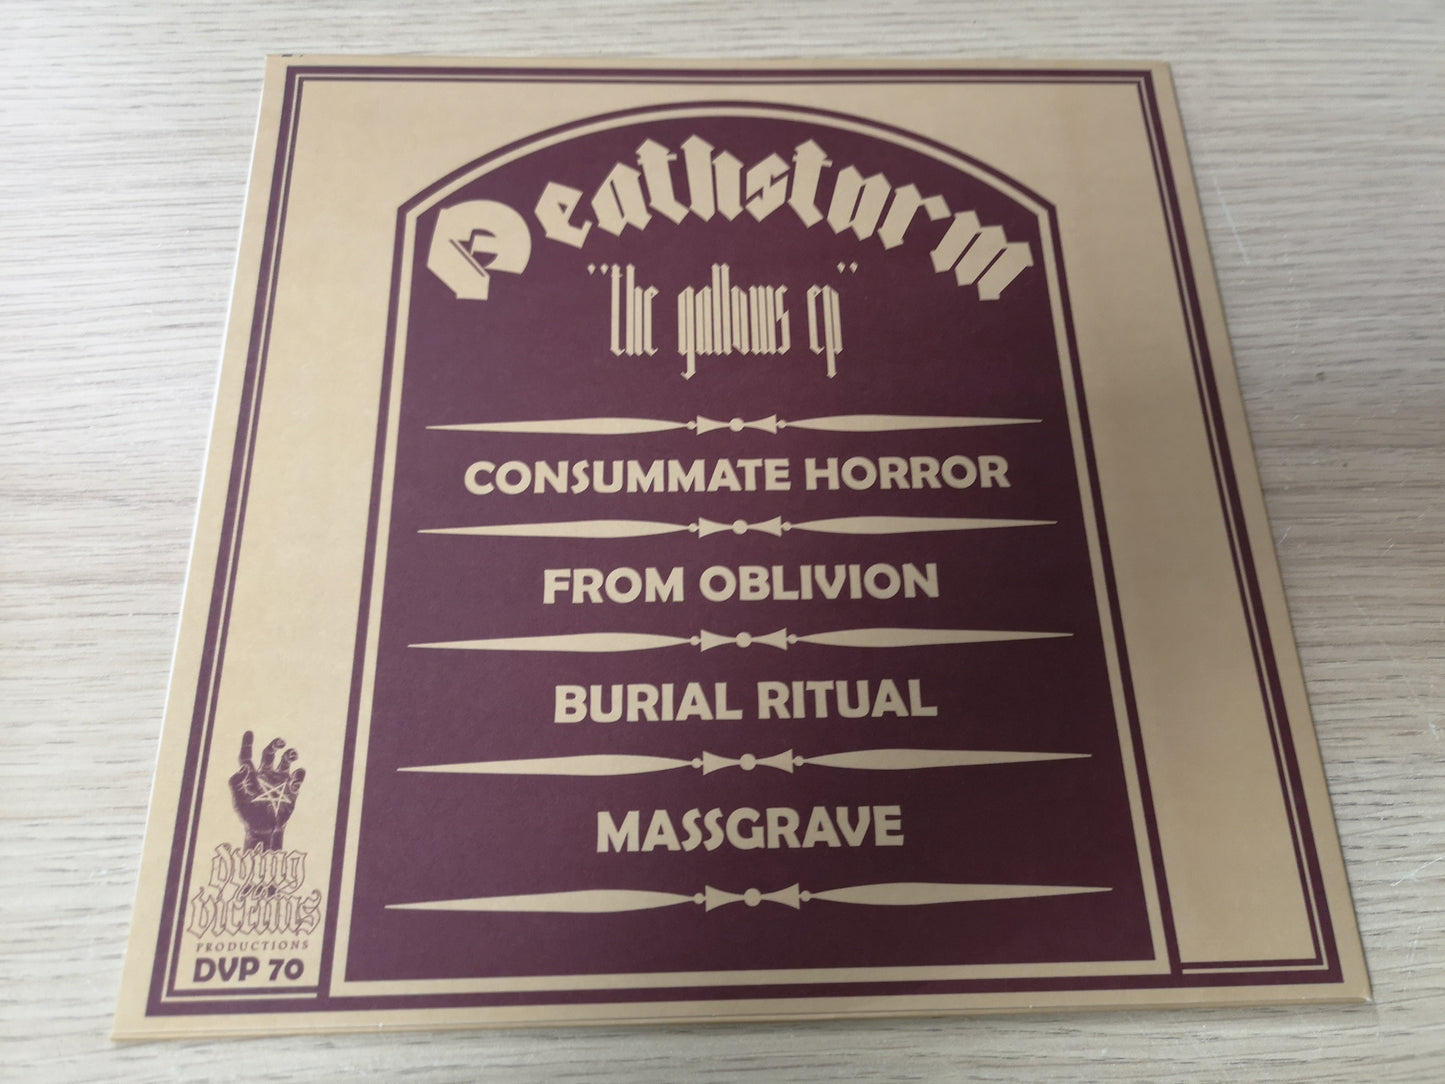 Deathstorm "The Gallows EP" NEW 10" Germany 2015